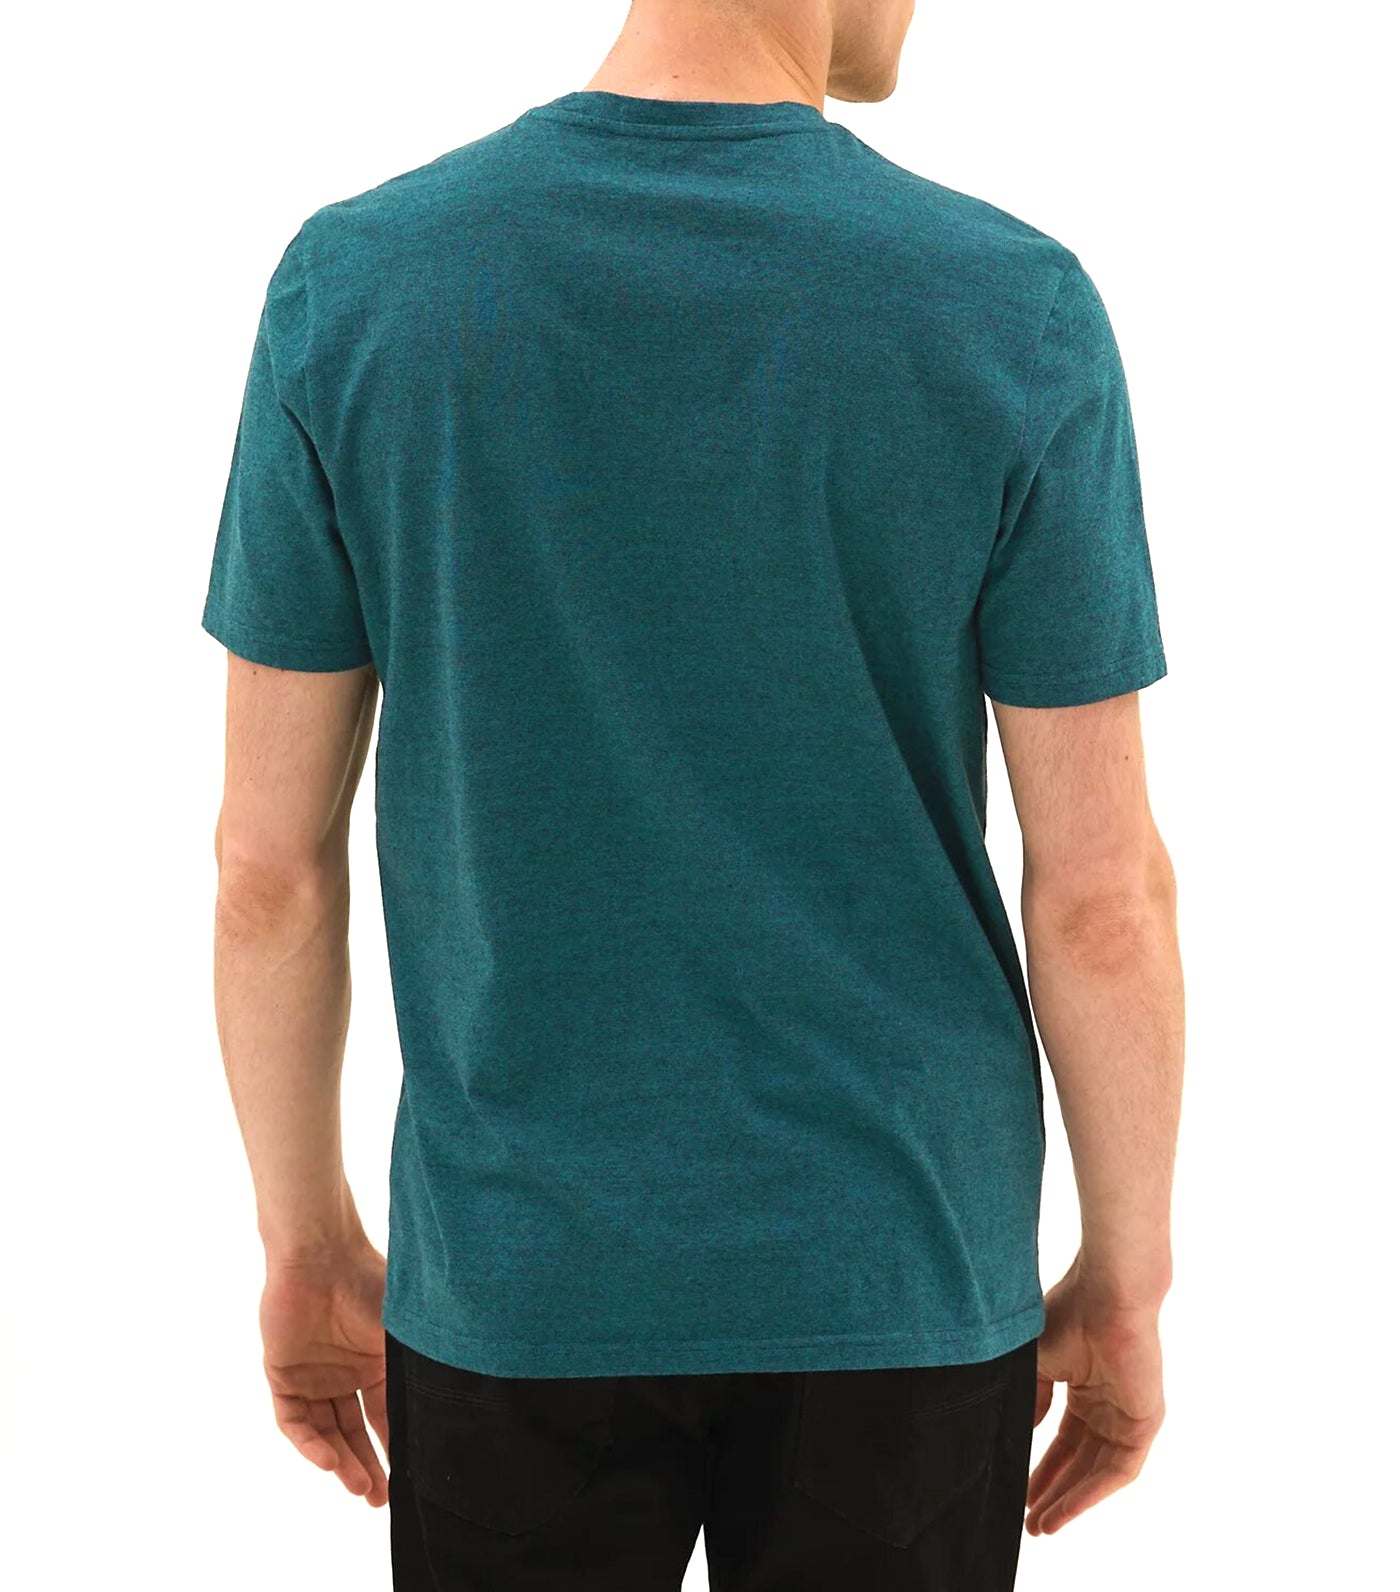 Marks & Spencer Pure Cotton Textured T-Shirt Teal Green